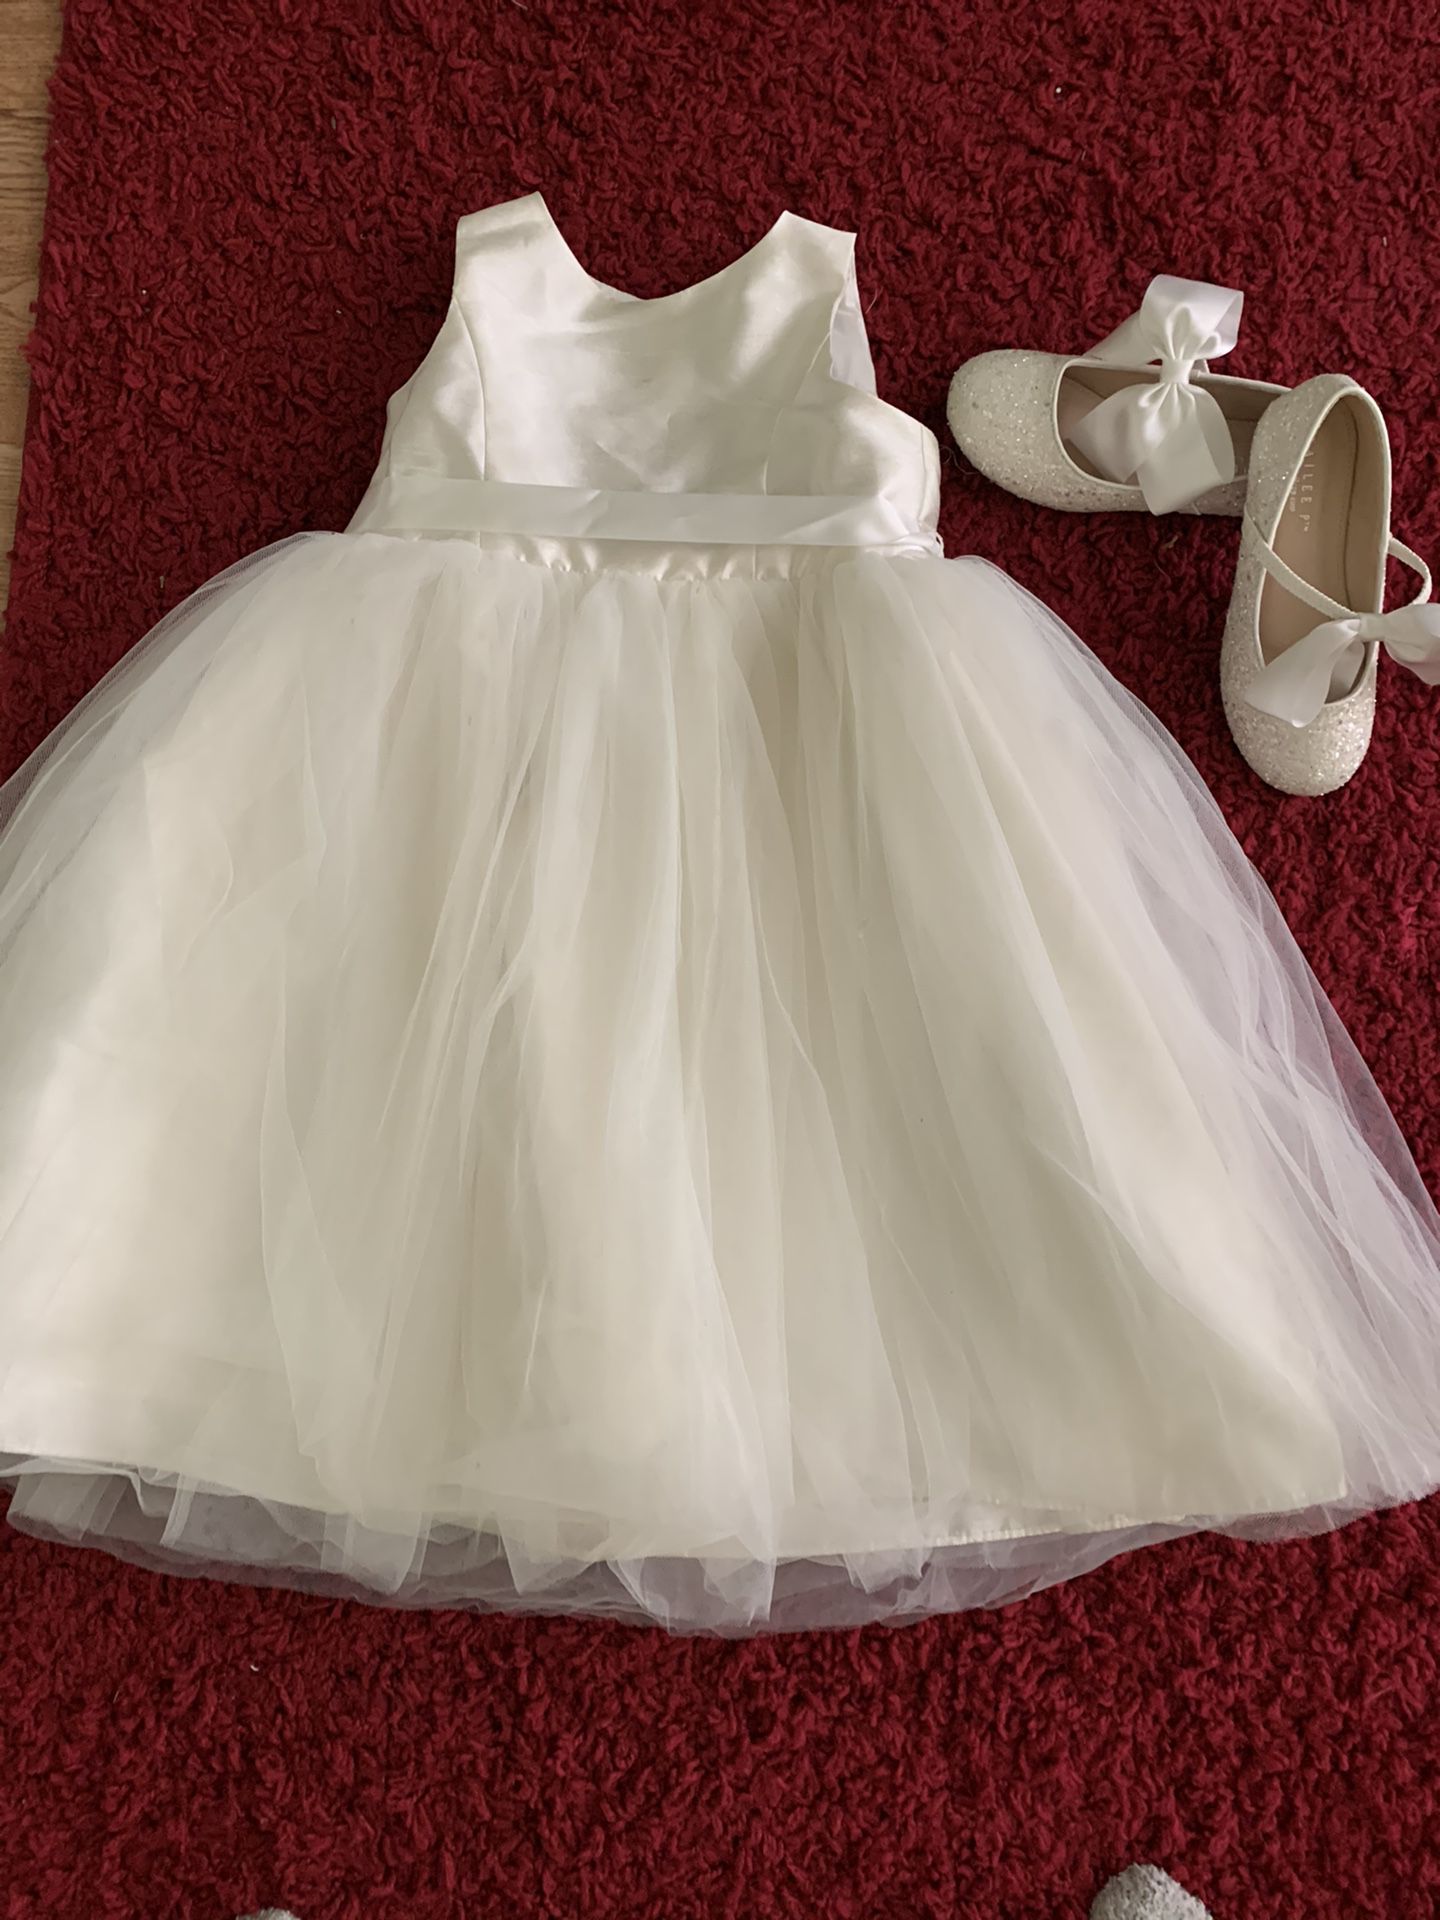 Ivory flower girl dress and shoes